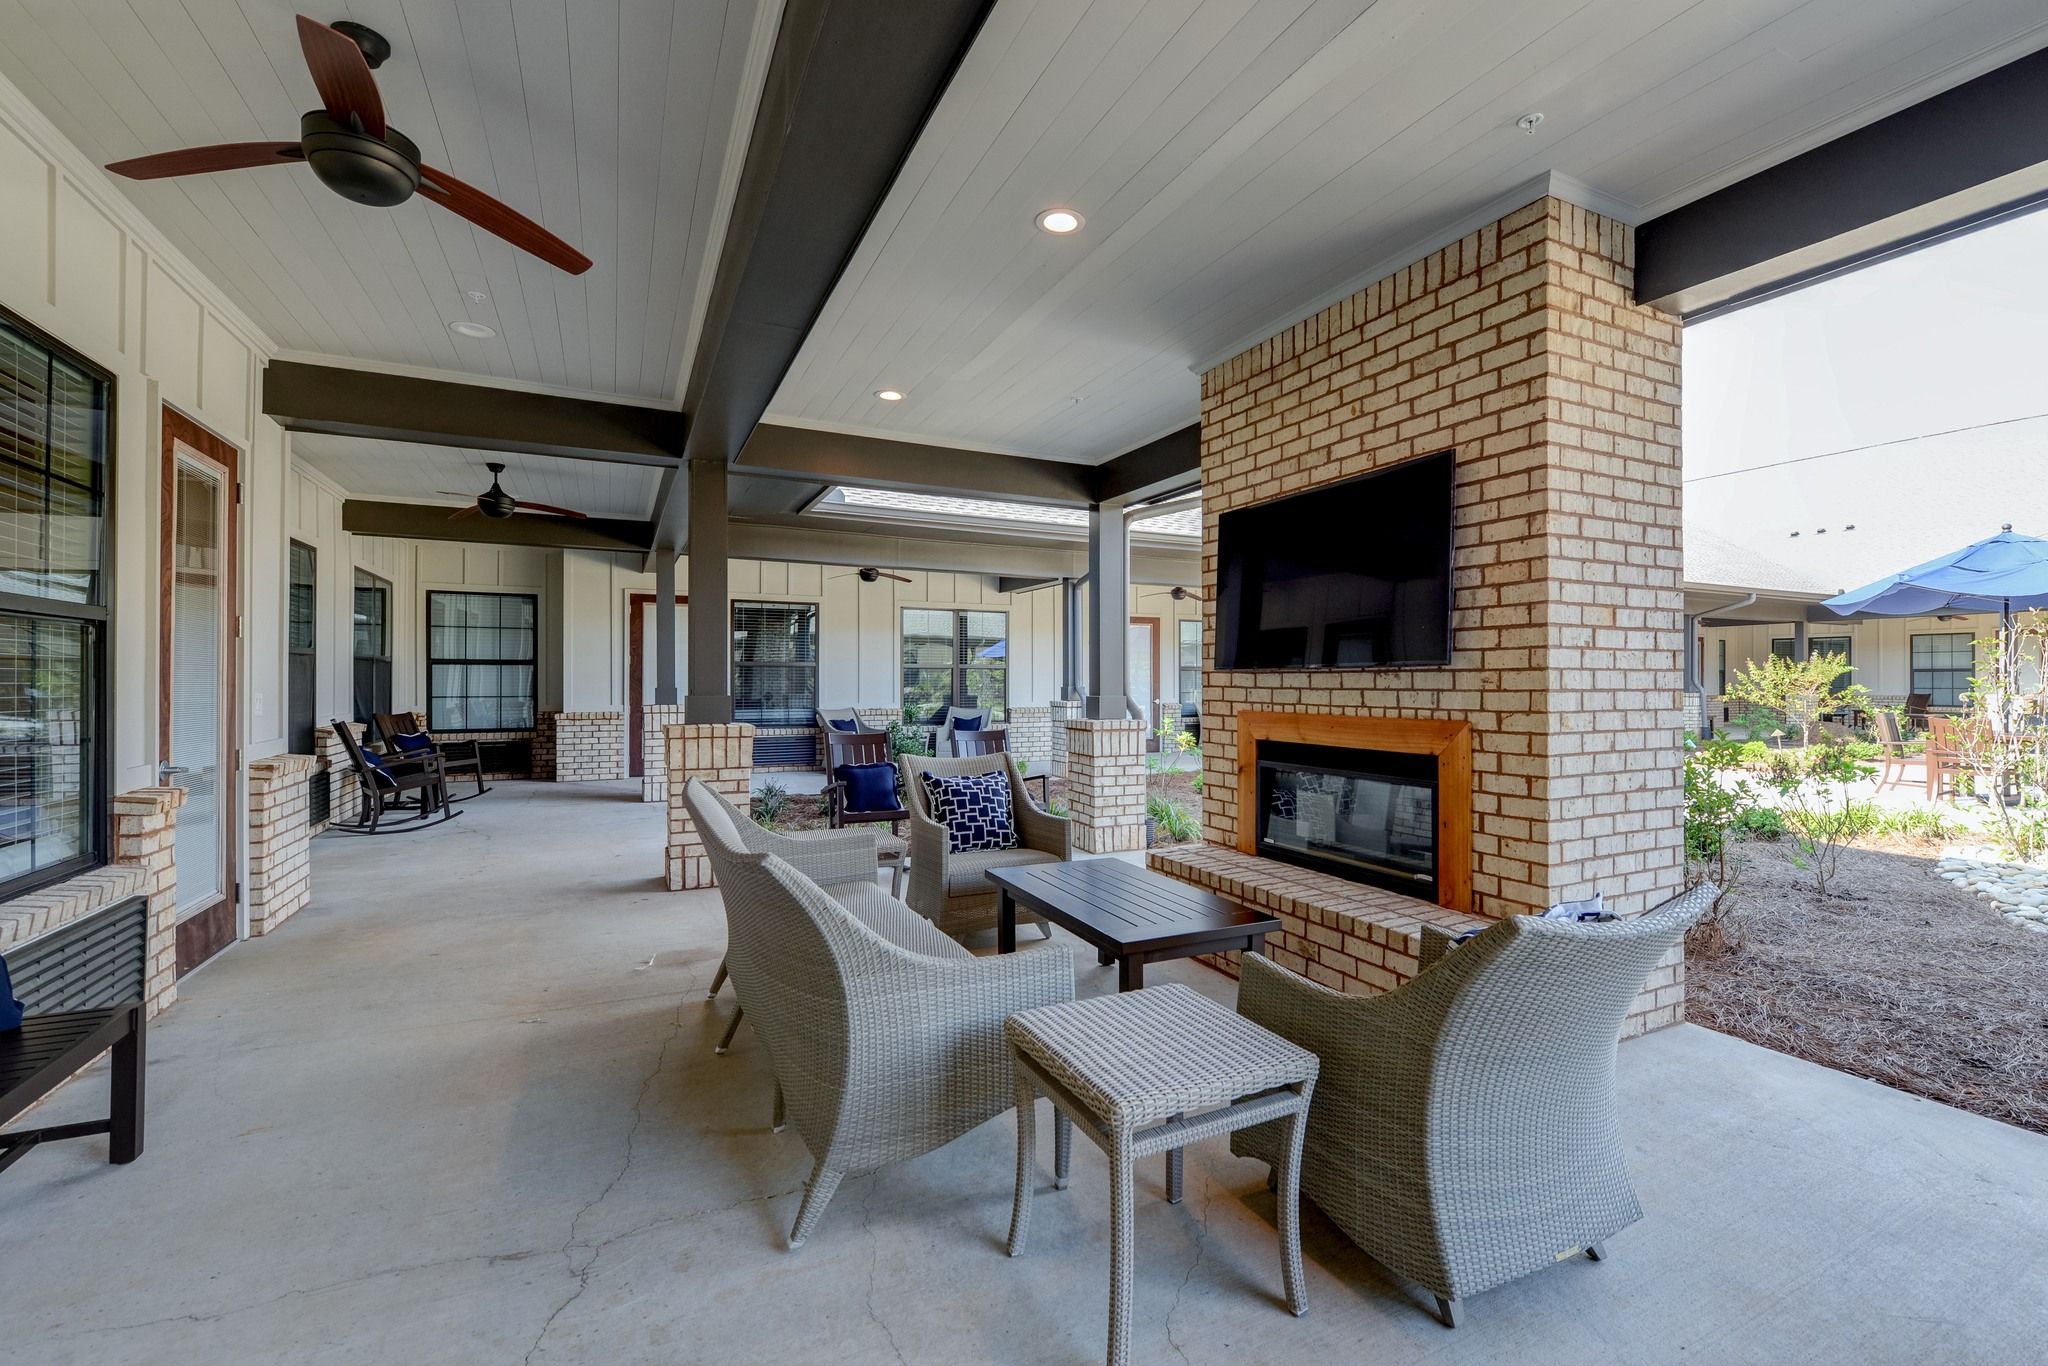 The Preserve at Meridian outdoor courtyard view with fireplace and tv